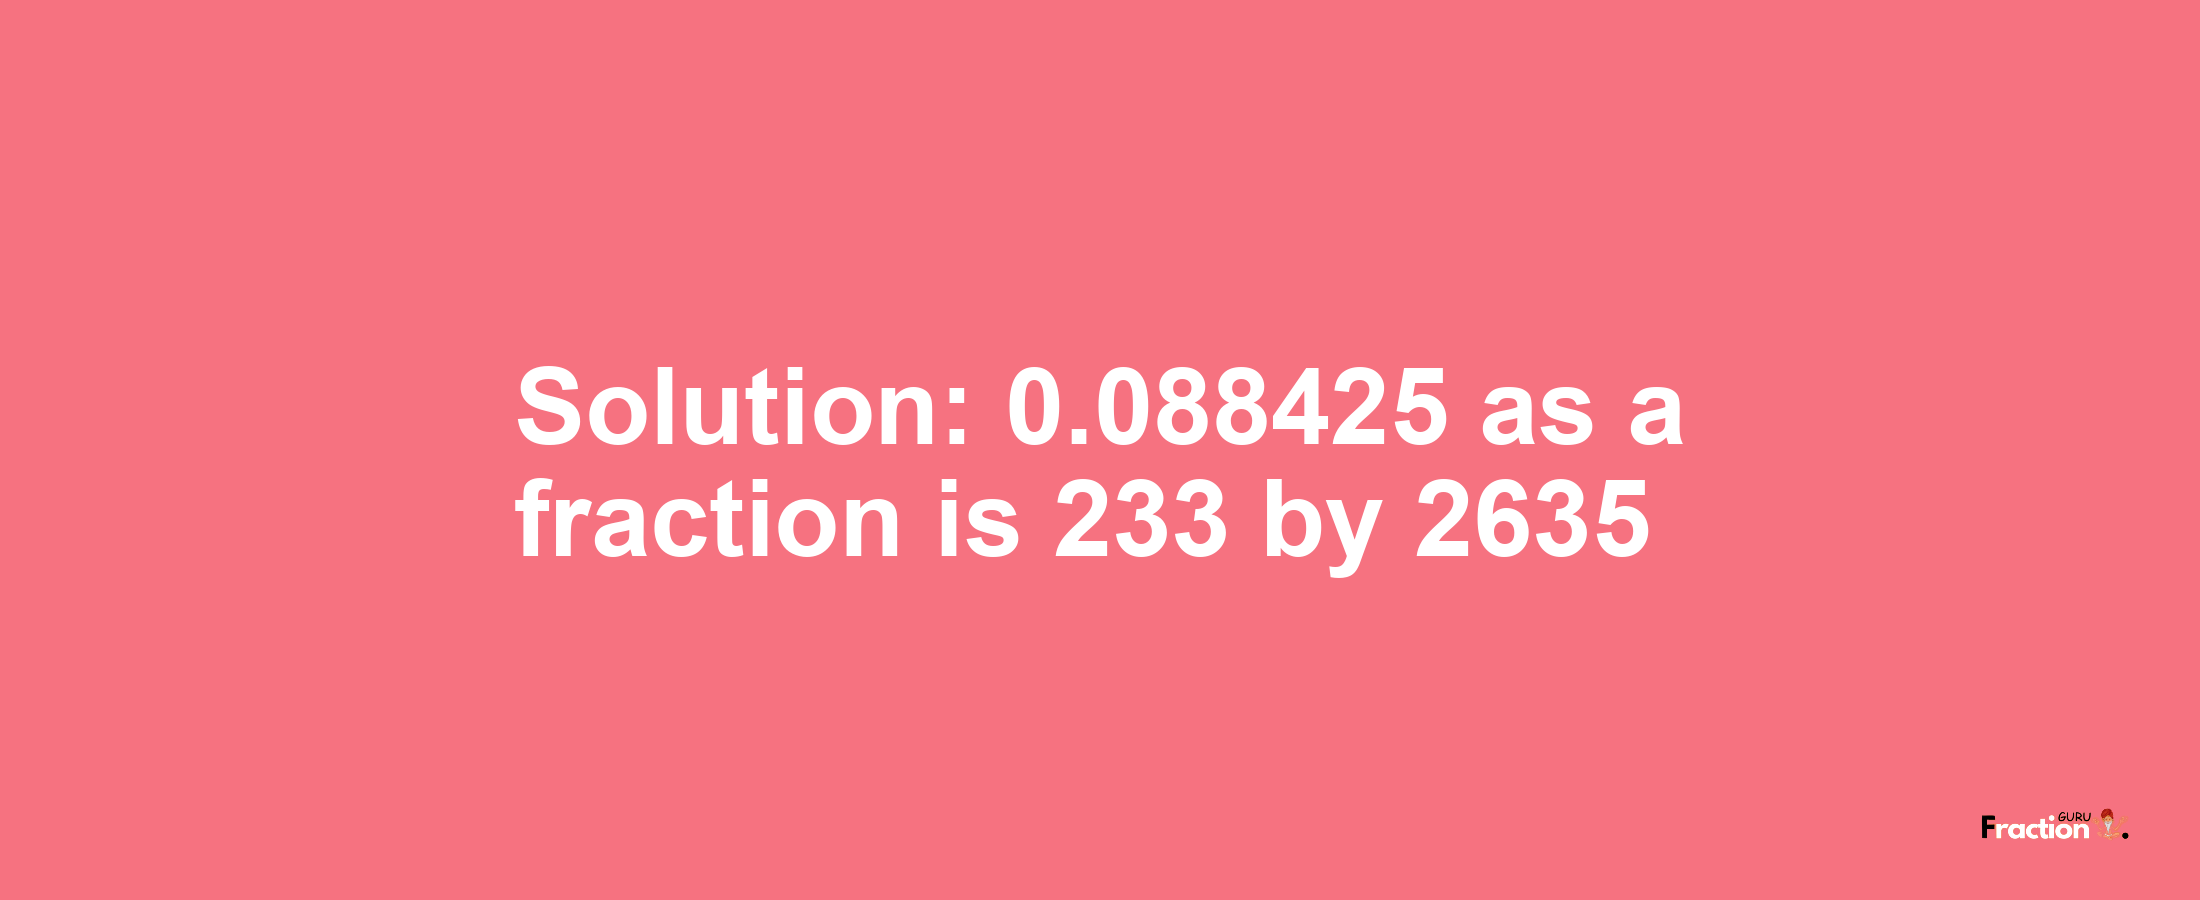 Solution:0.088425 as a fraction is 233/2635